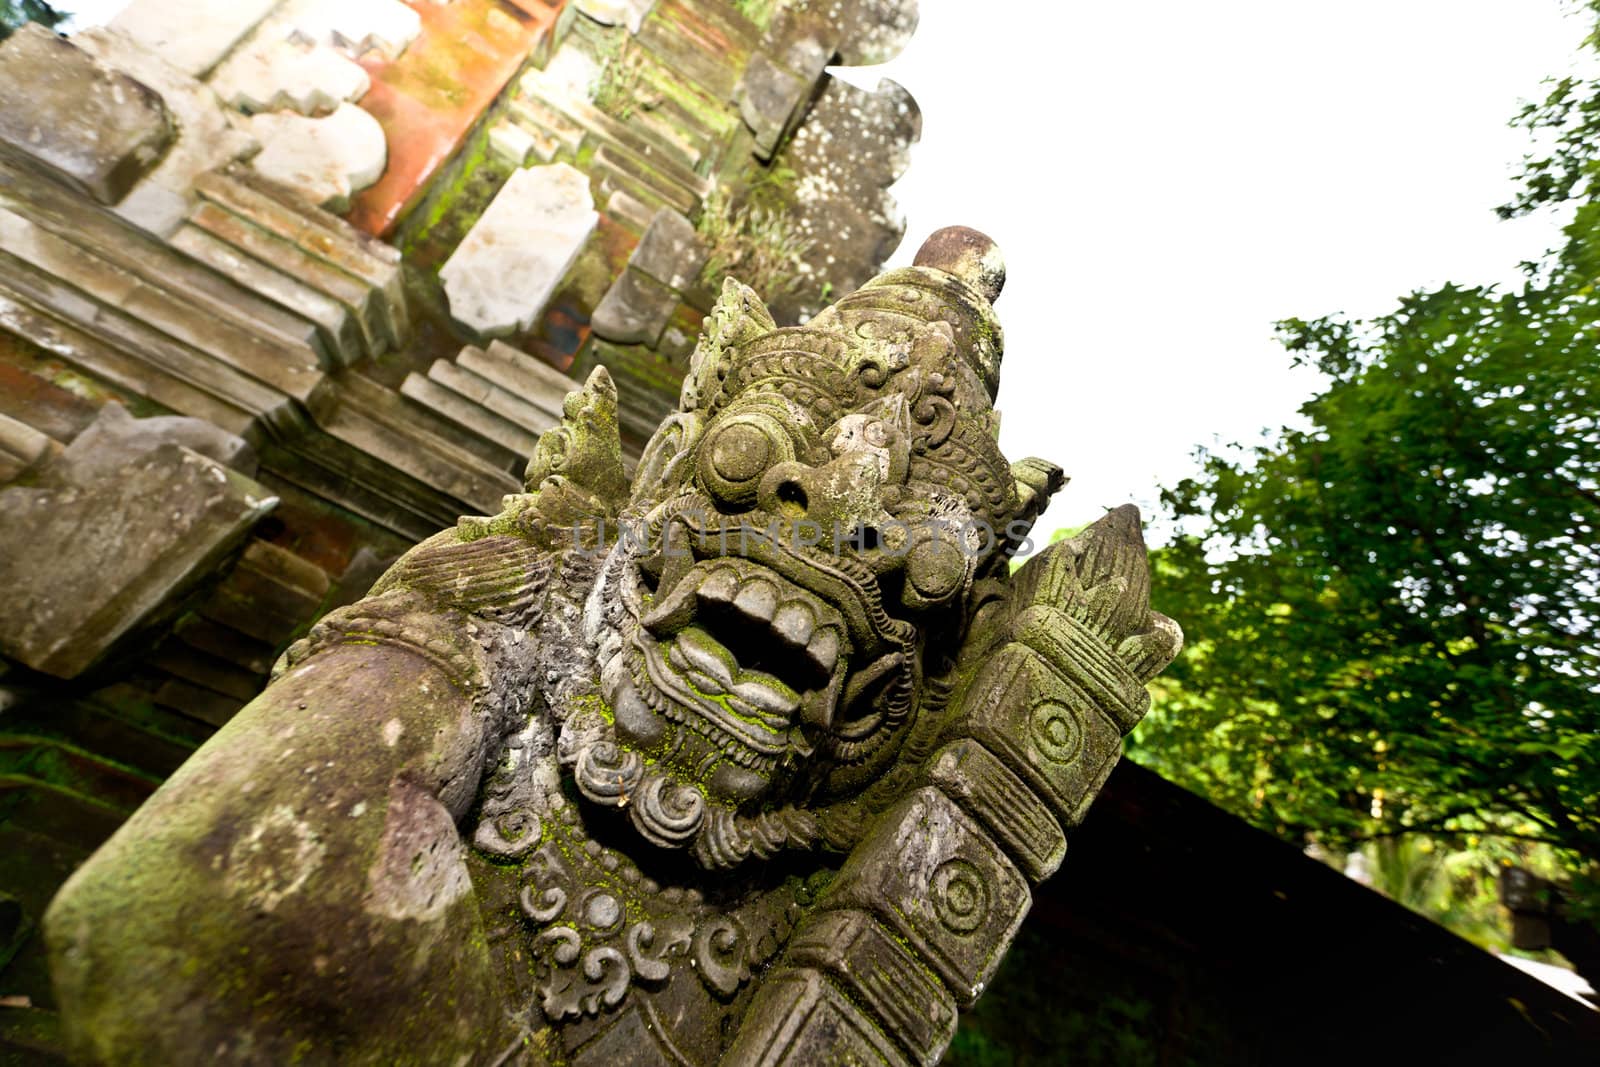 Balinese sculpture by jrstock